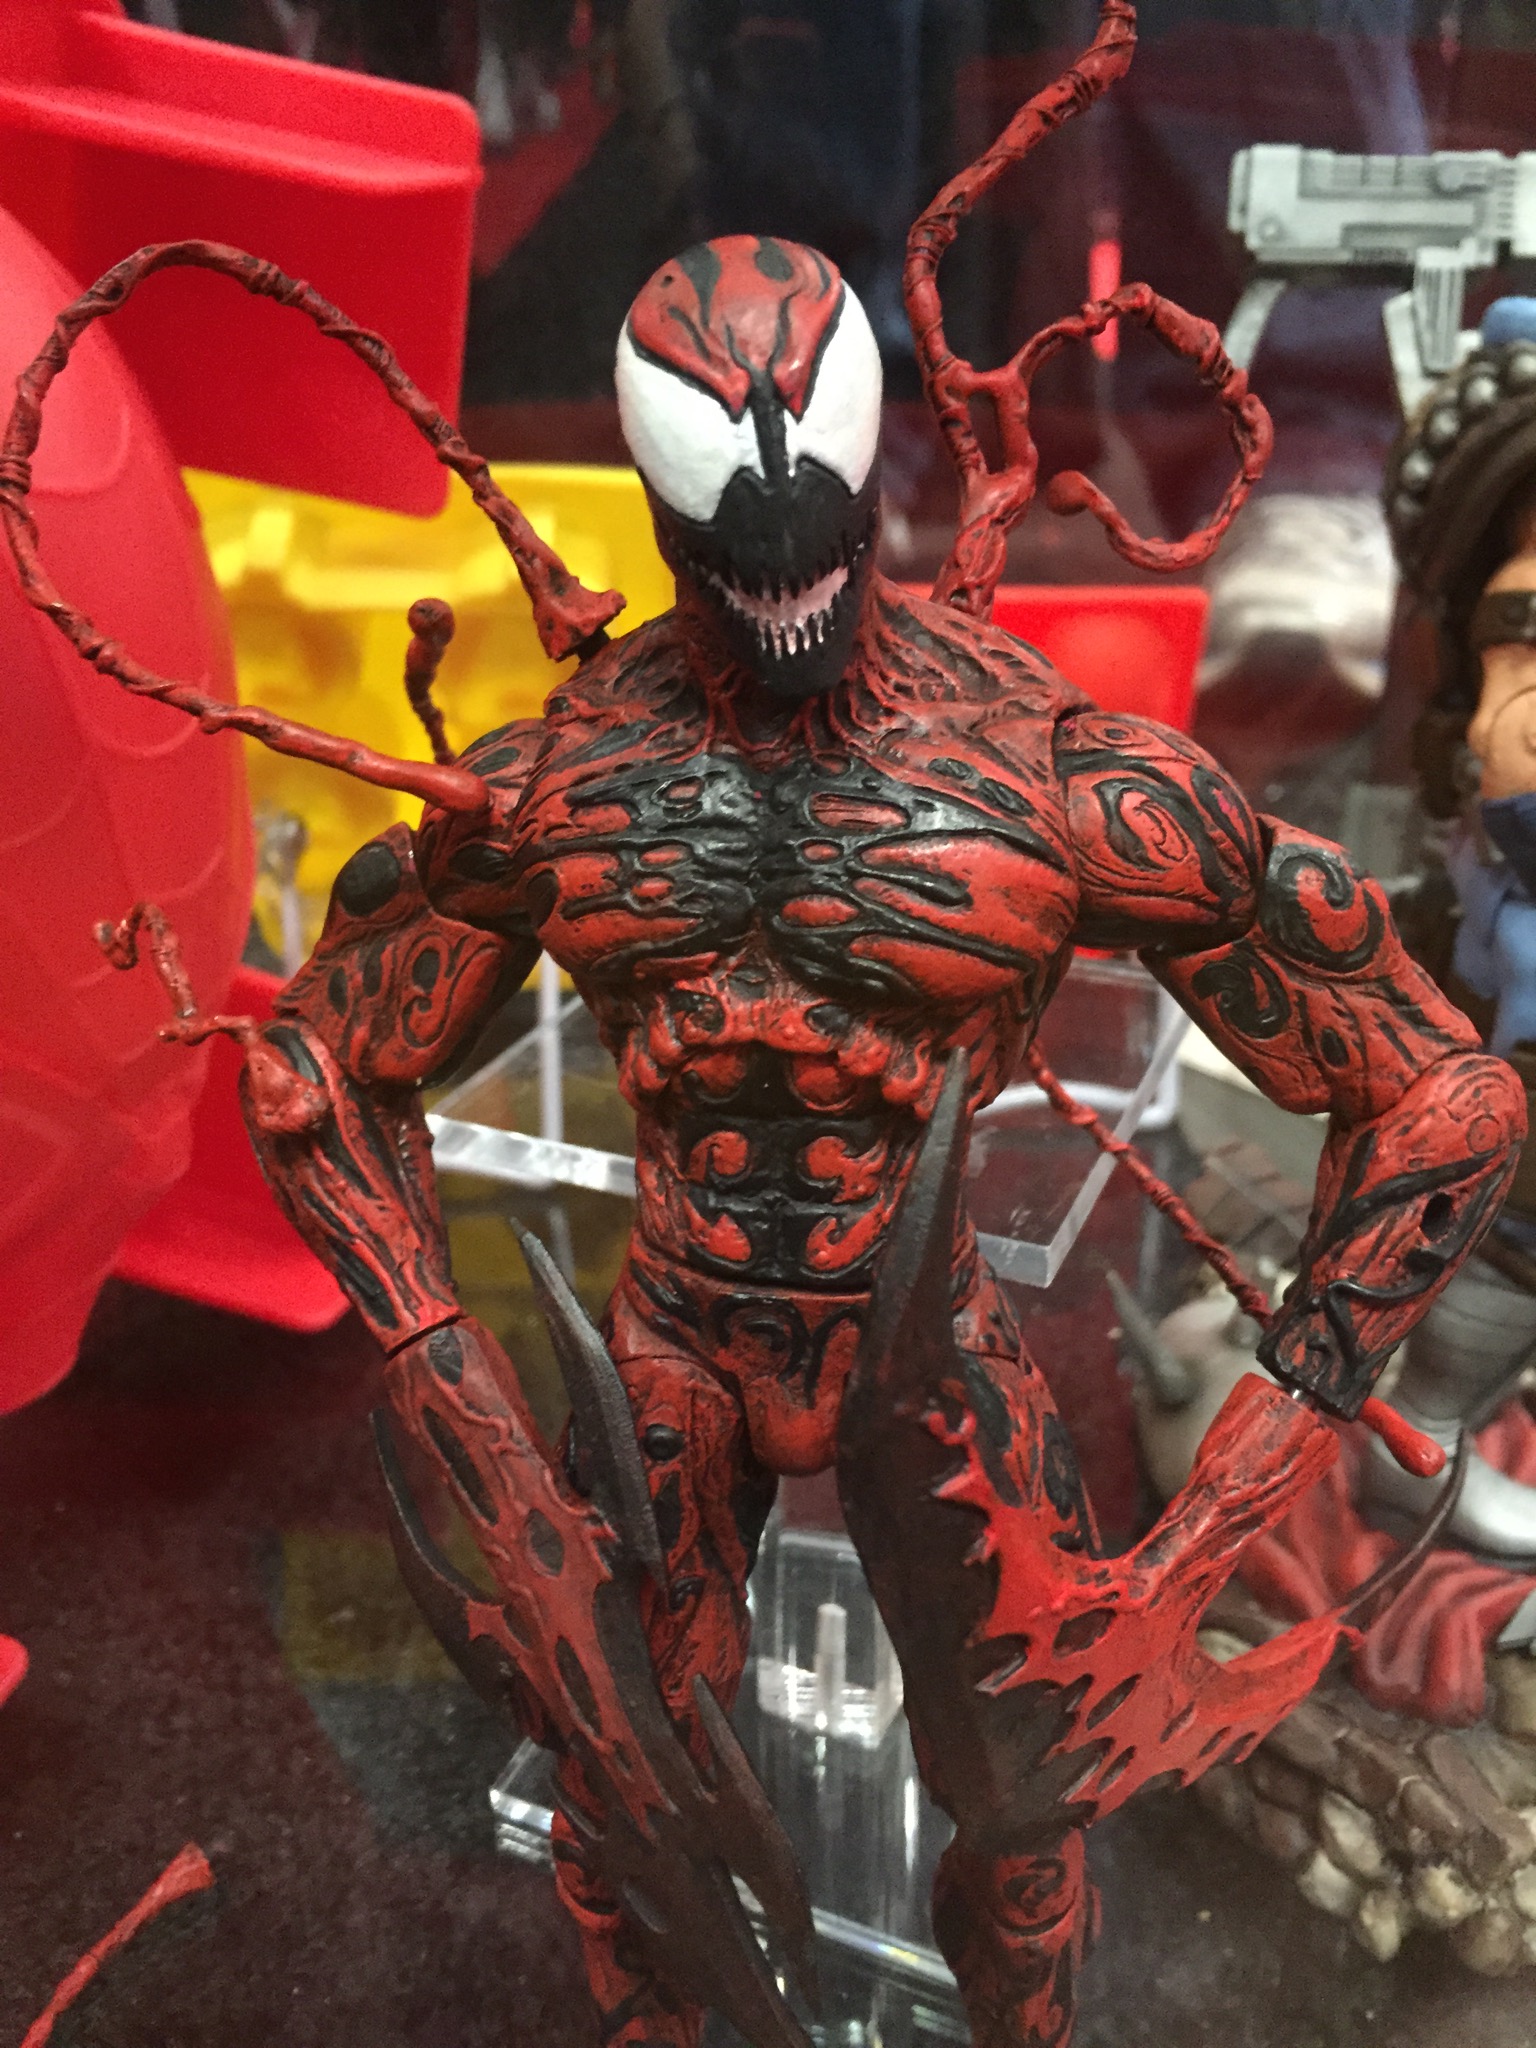 NYCC 2014 Marvel Select Carnage Figure Photos & Order Info